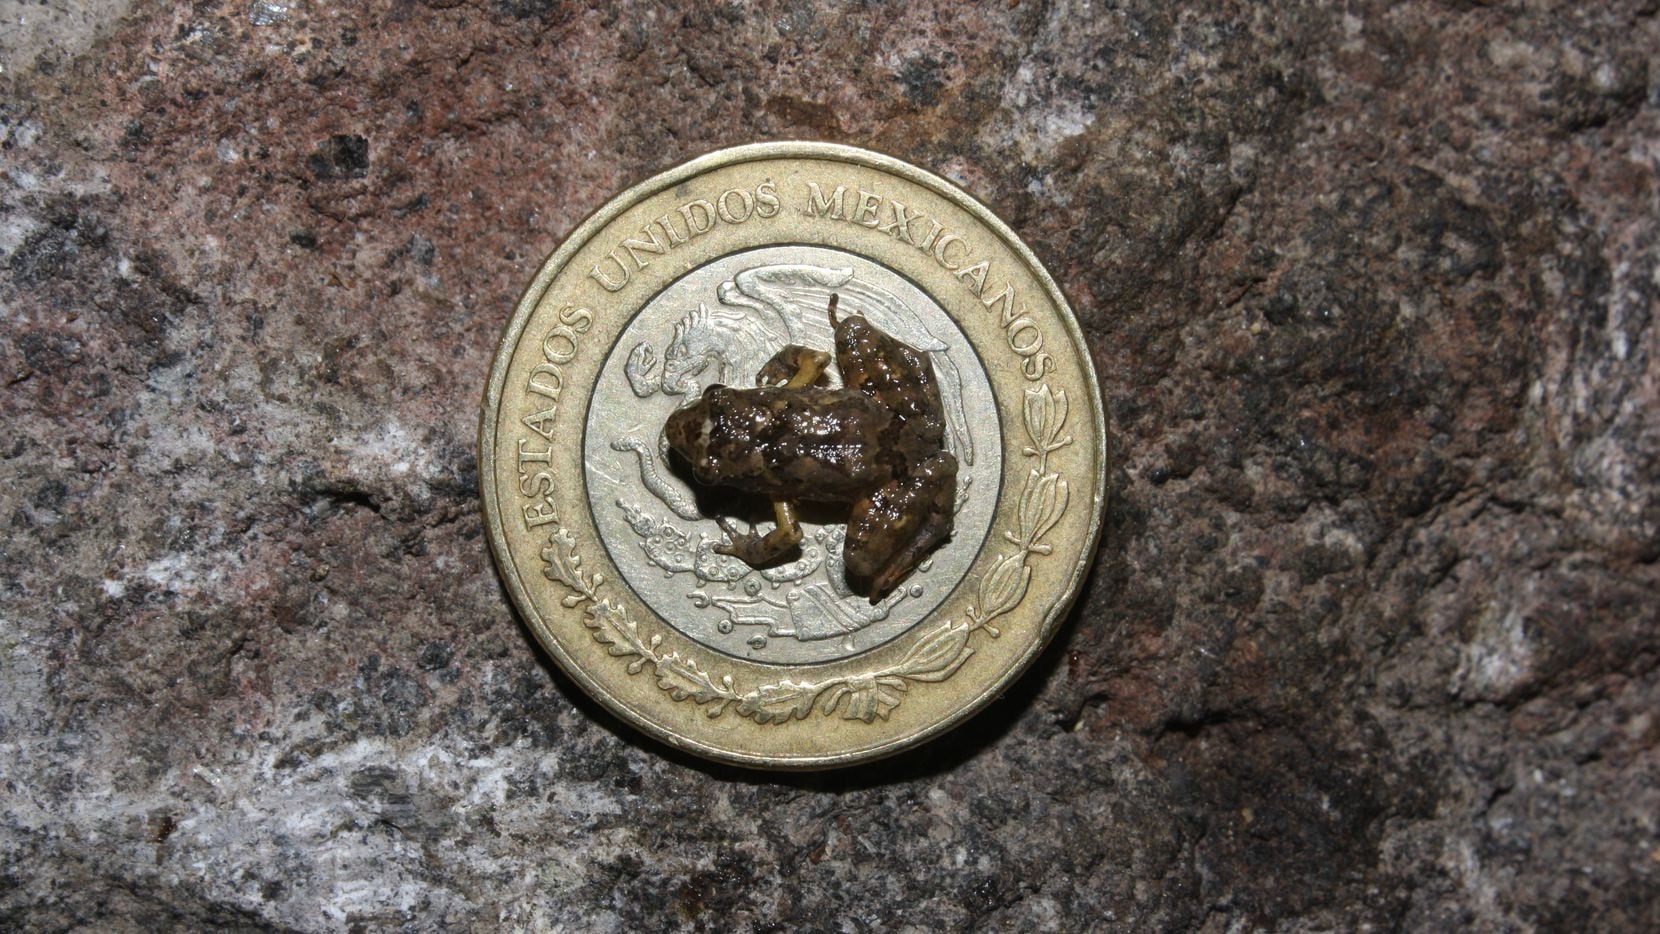 A Craugastor rubinus frog is photographed on a coin in Jalisco, Mexico.